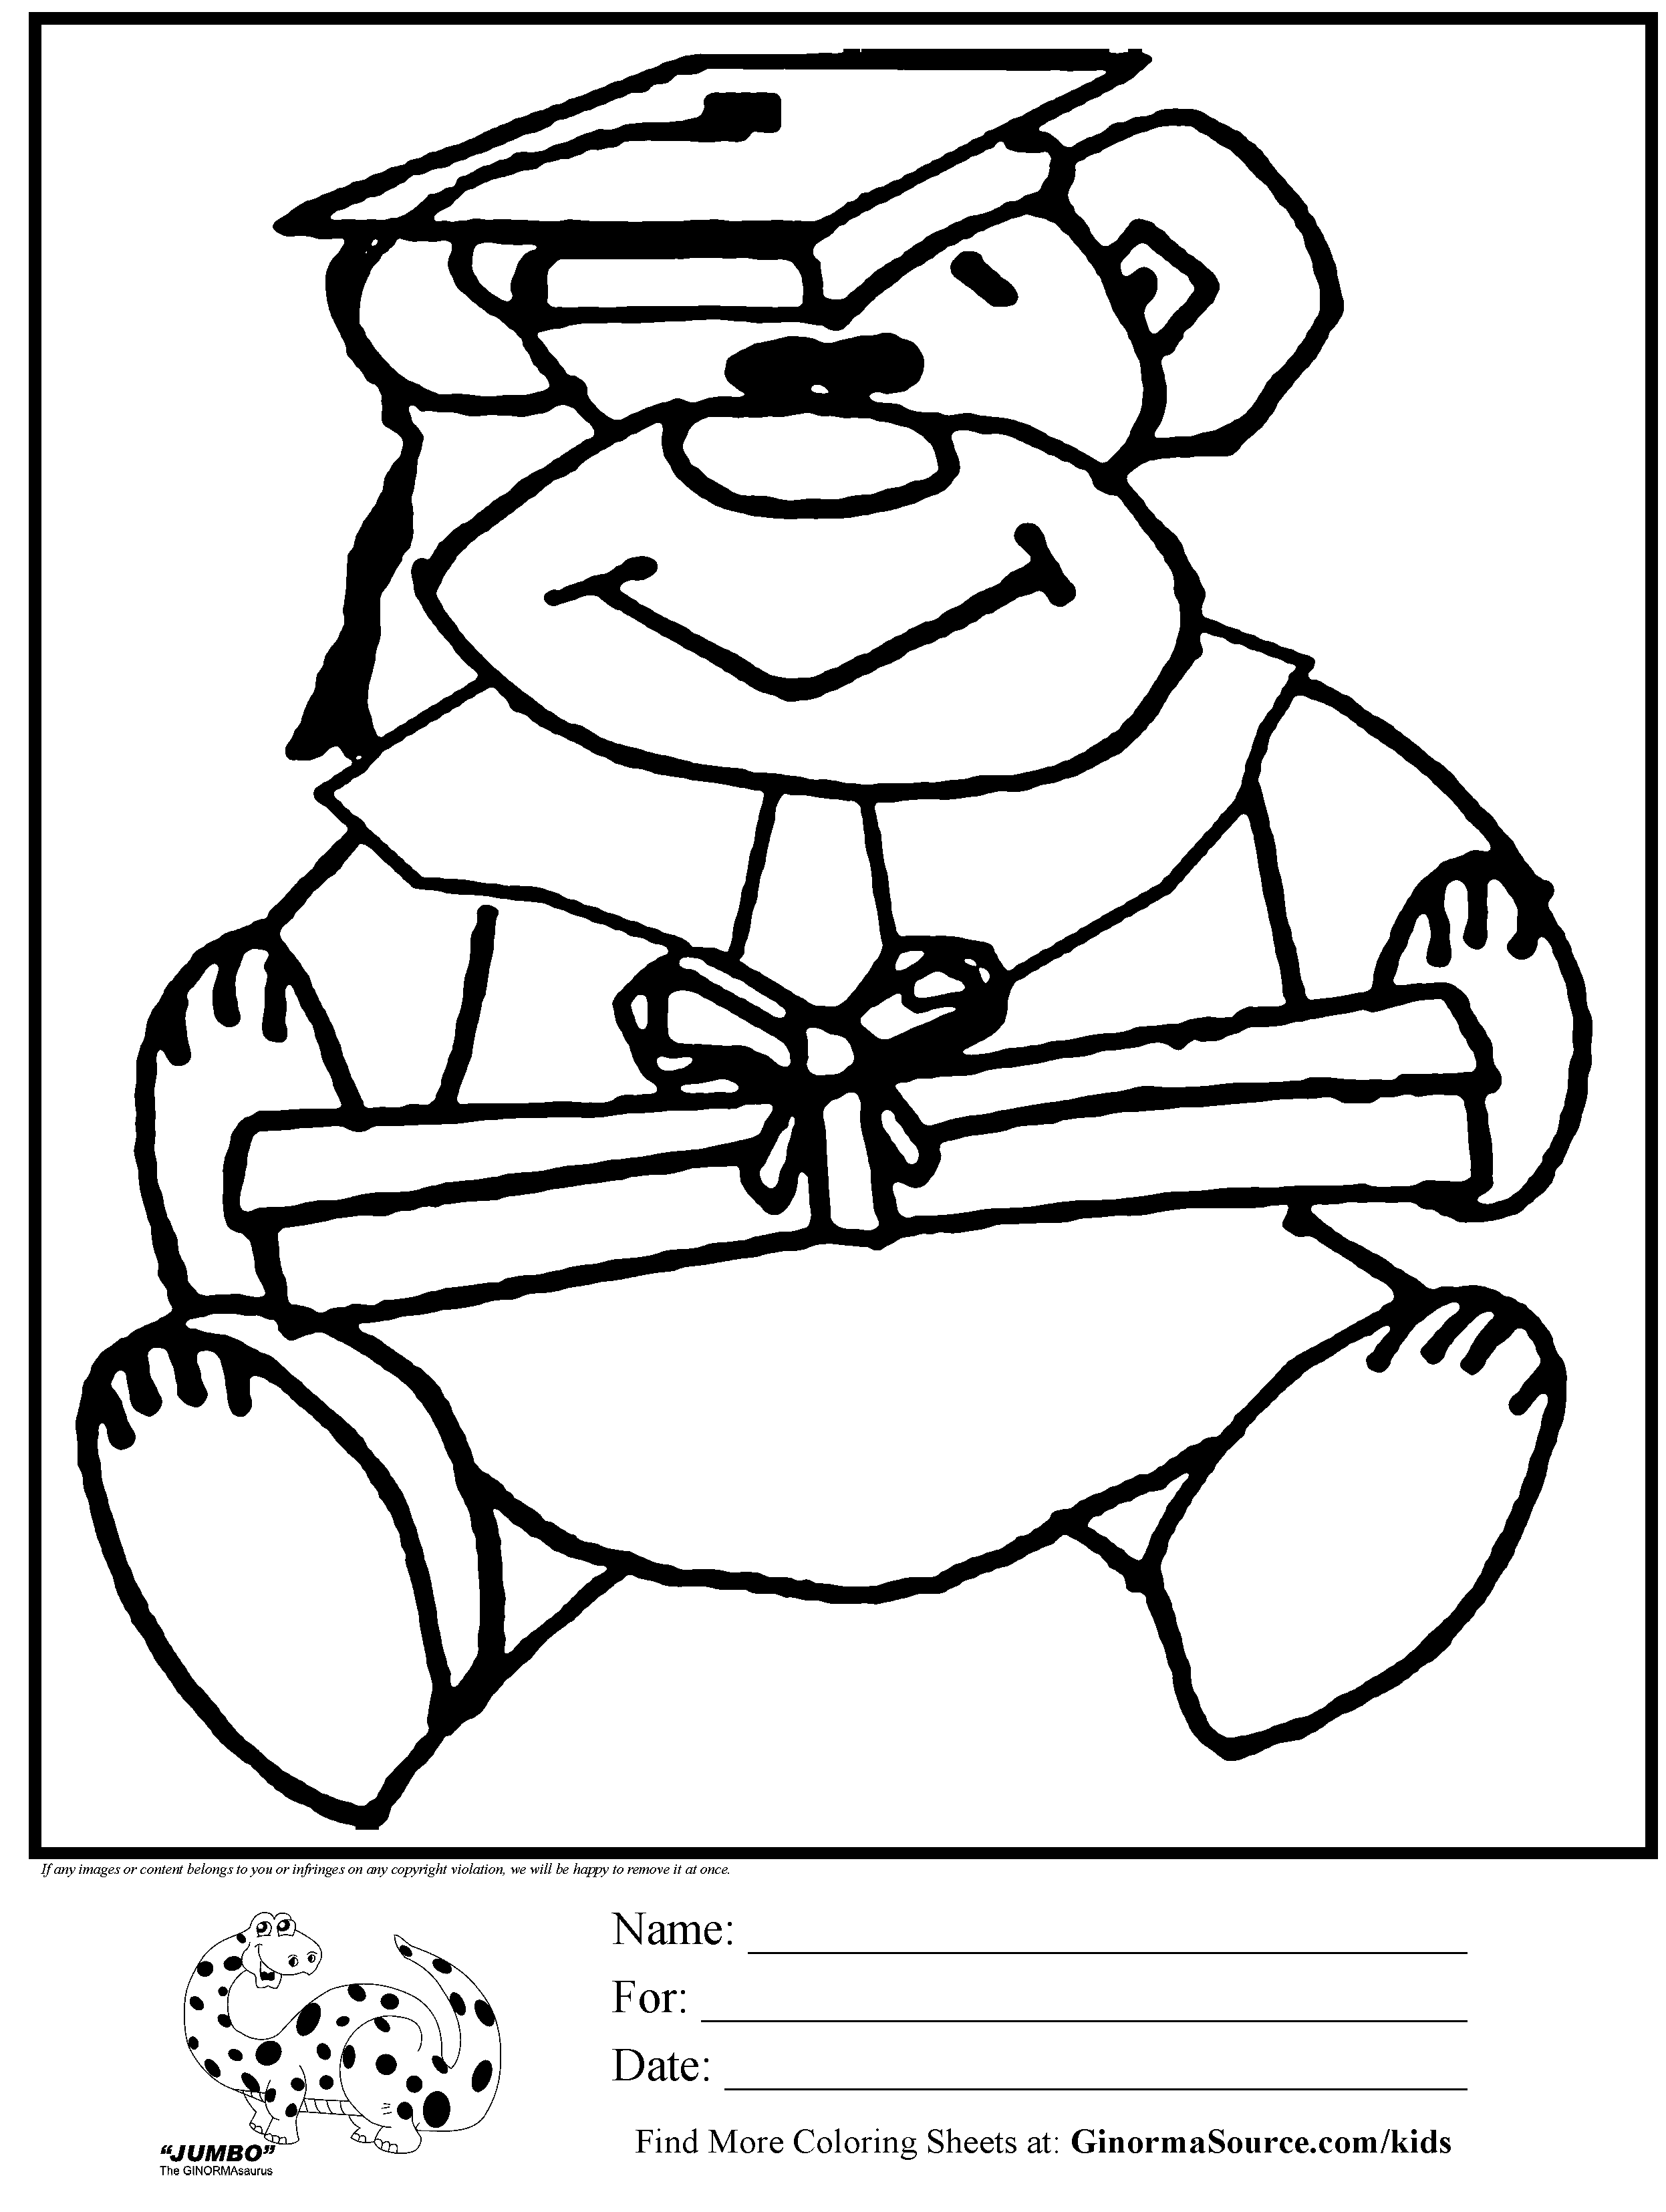 High School Graduation Coloring Pages - High Quality Coloring Pages